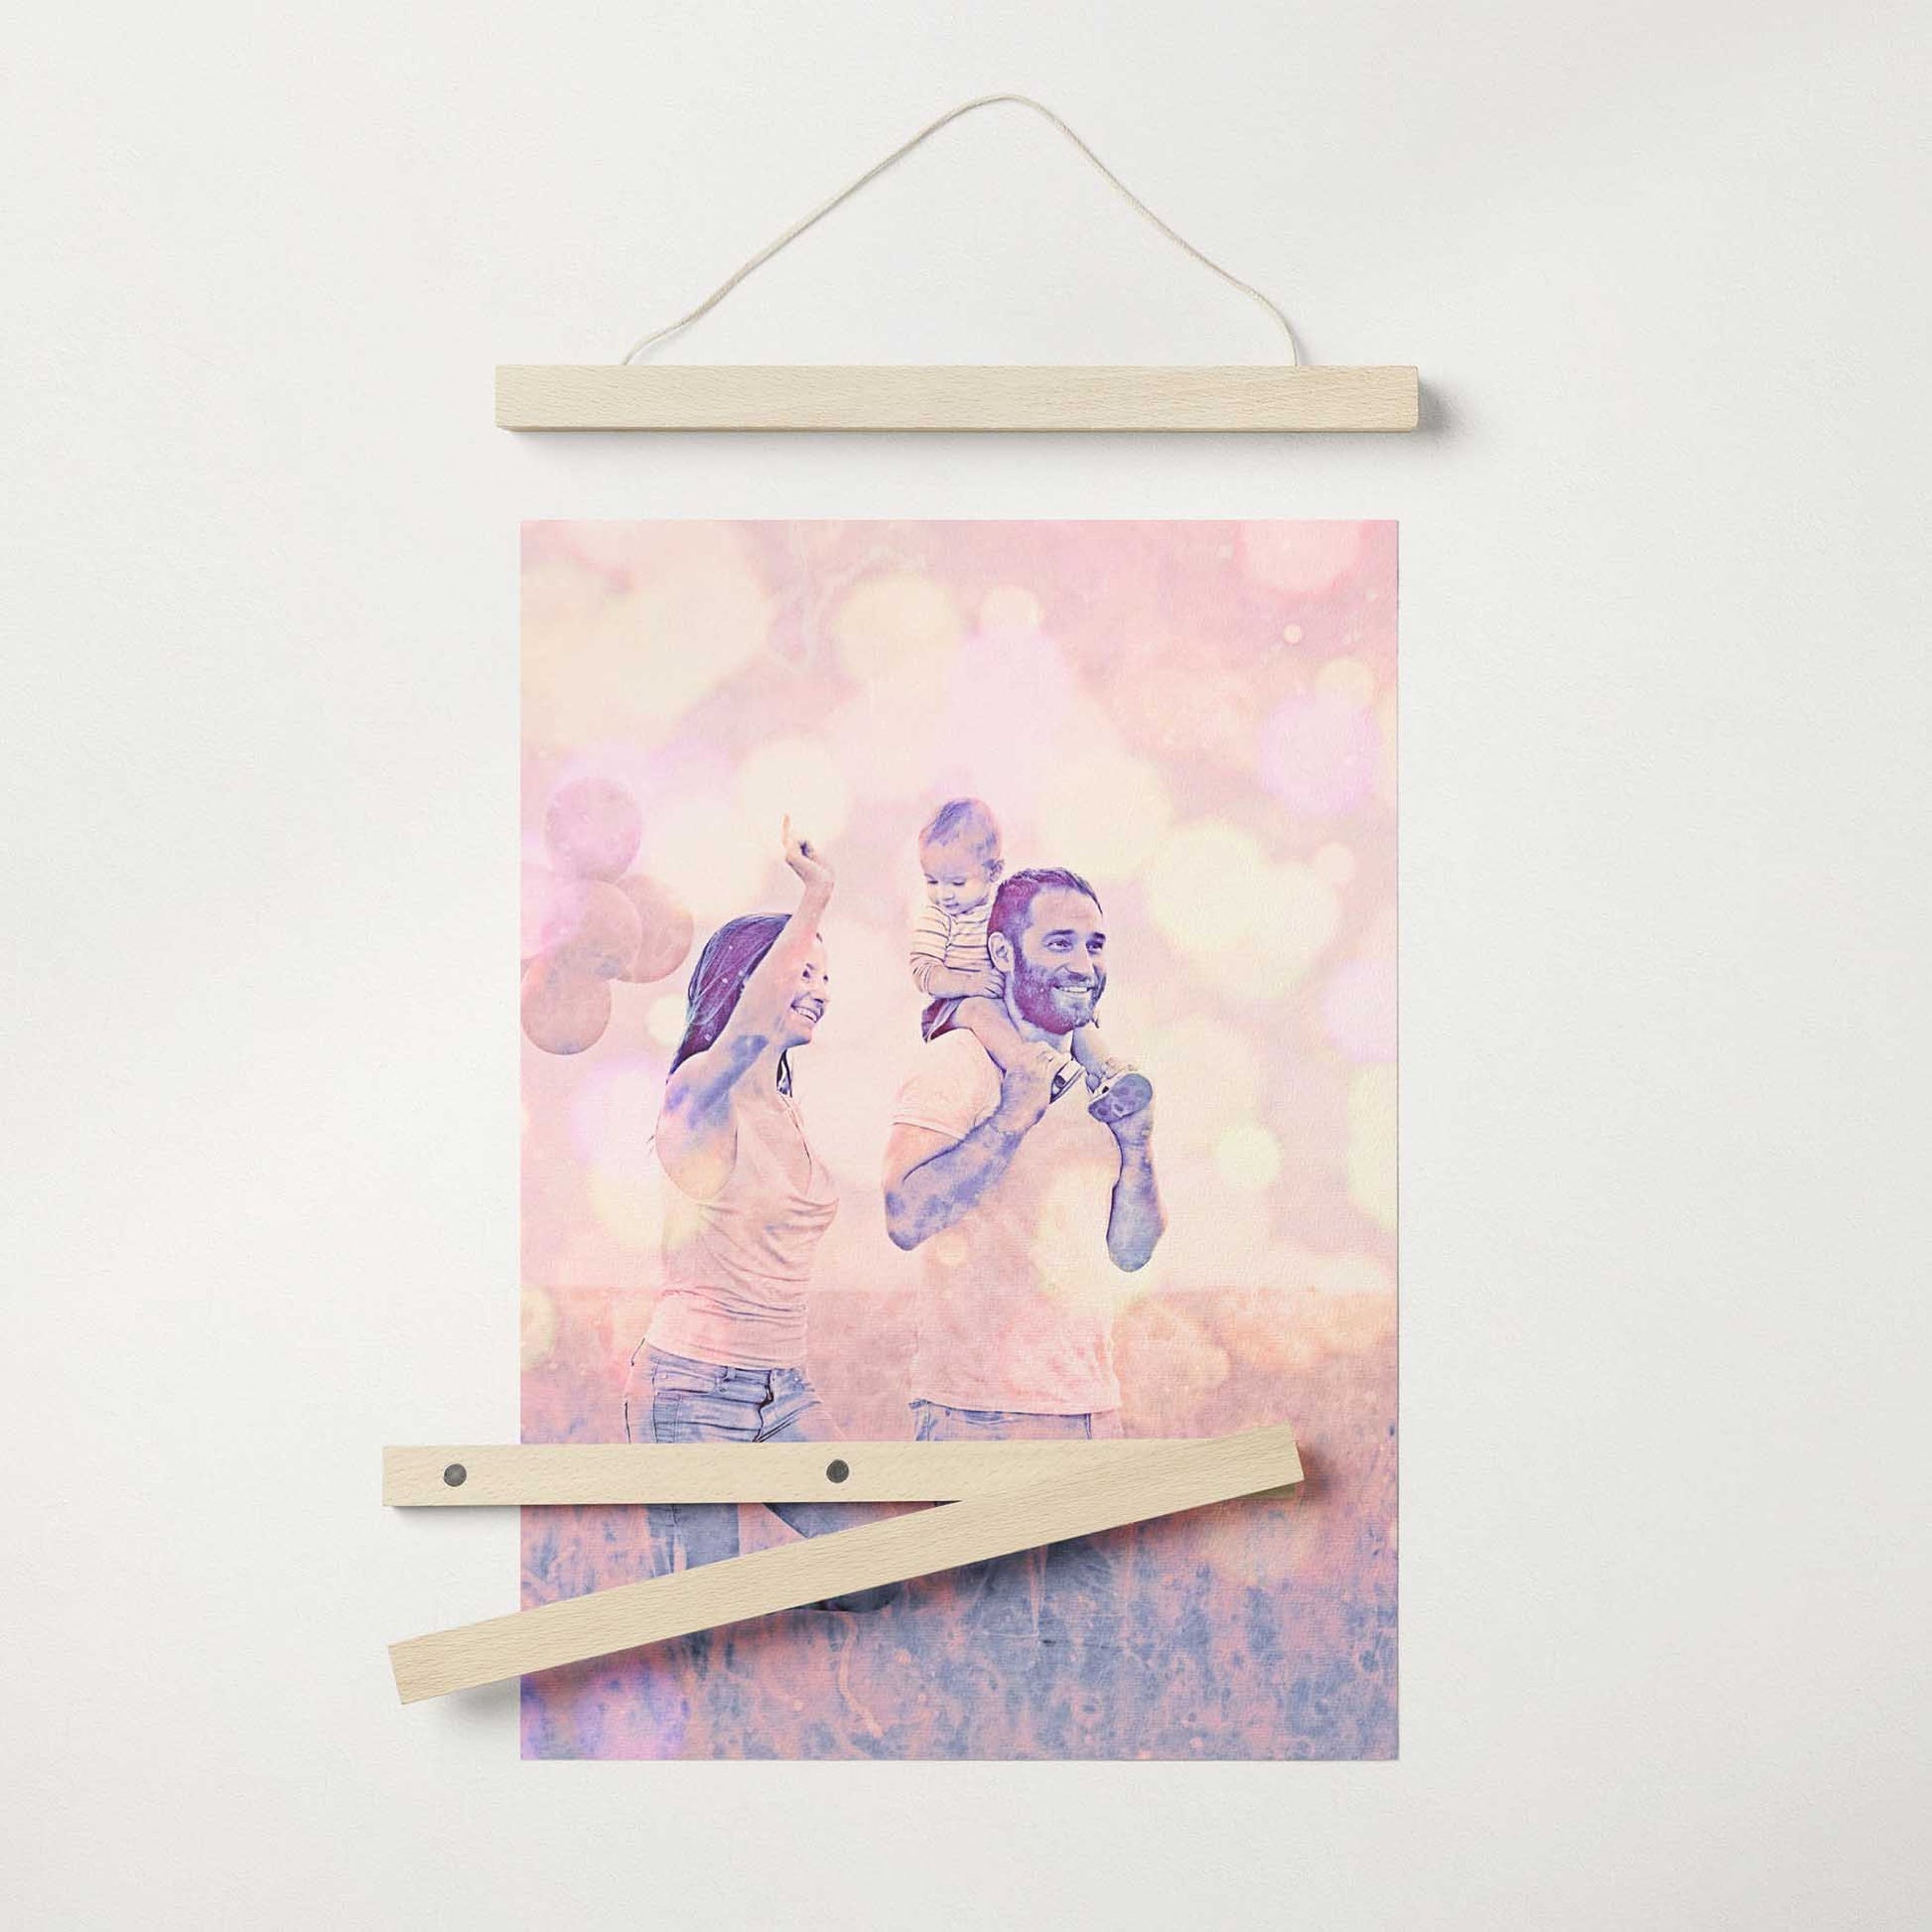 Embrace the vibrant and creative energy with the Personalised Special Purple FX Poster Hanger. Print your cherished photos with a special effect filter, resulting in captivating purple hues that inspire positivity and happiness